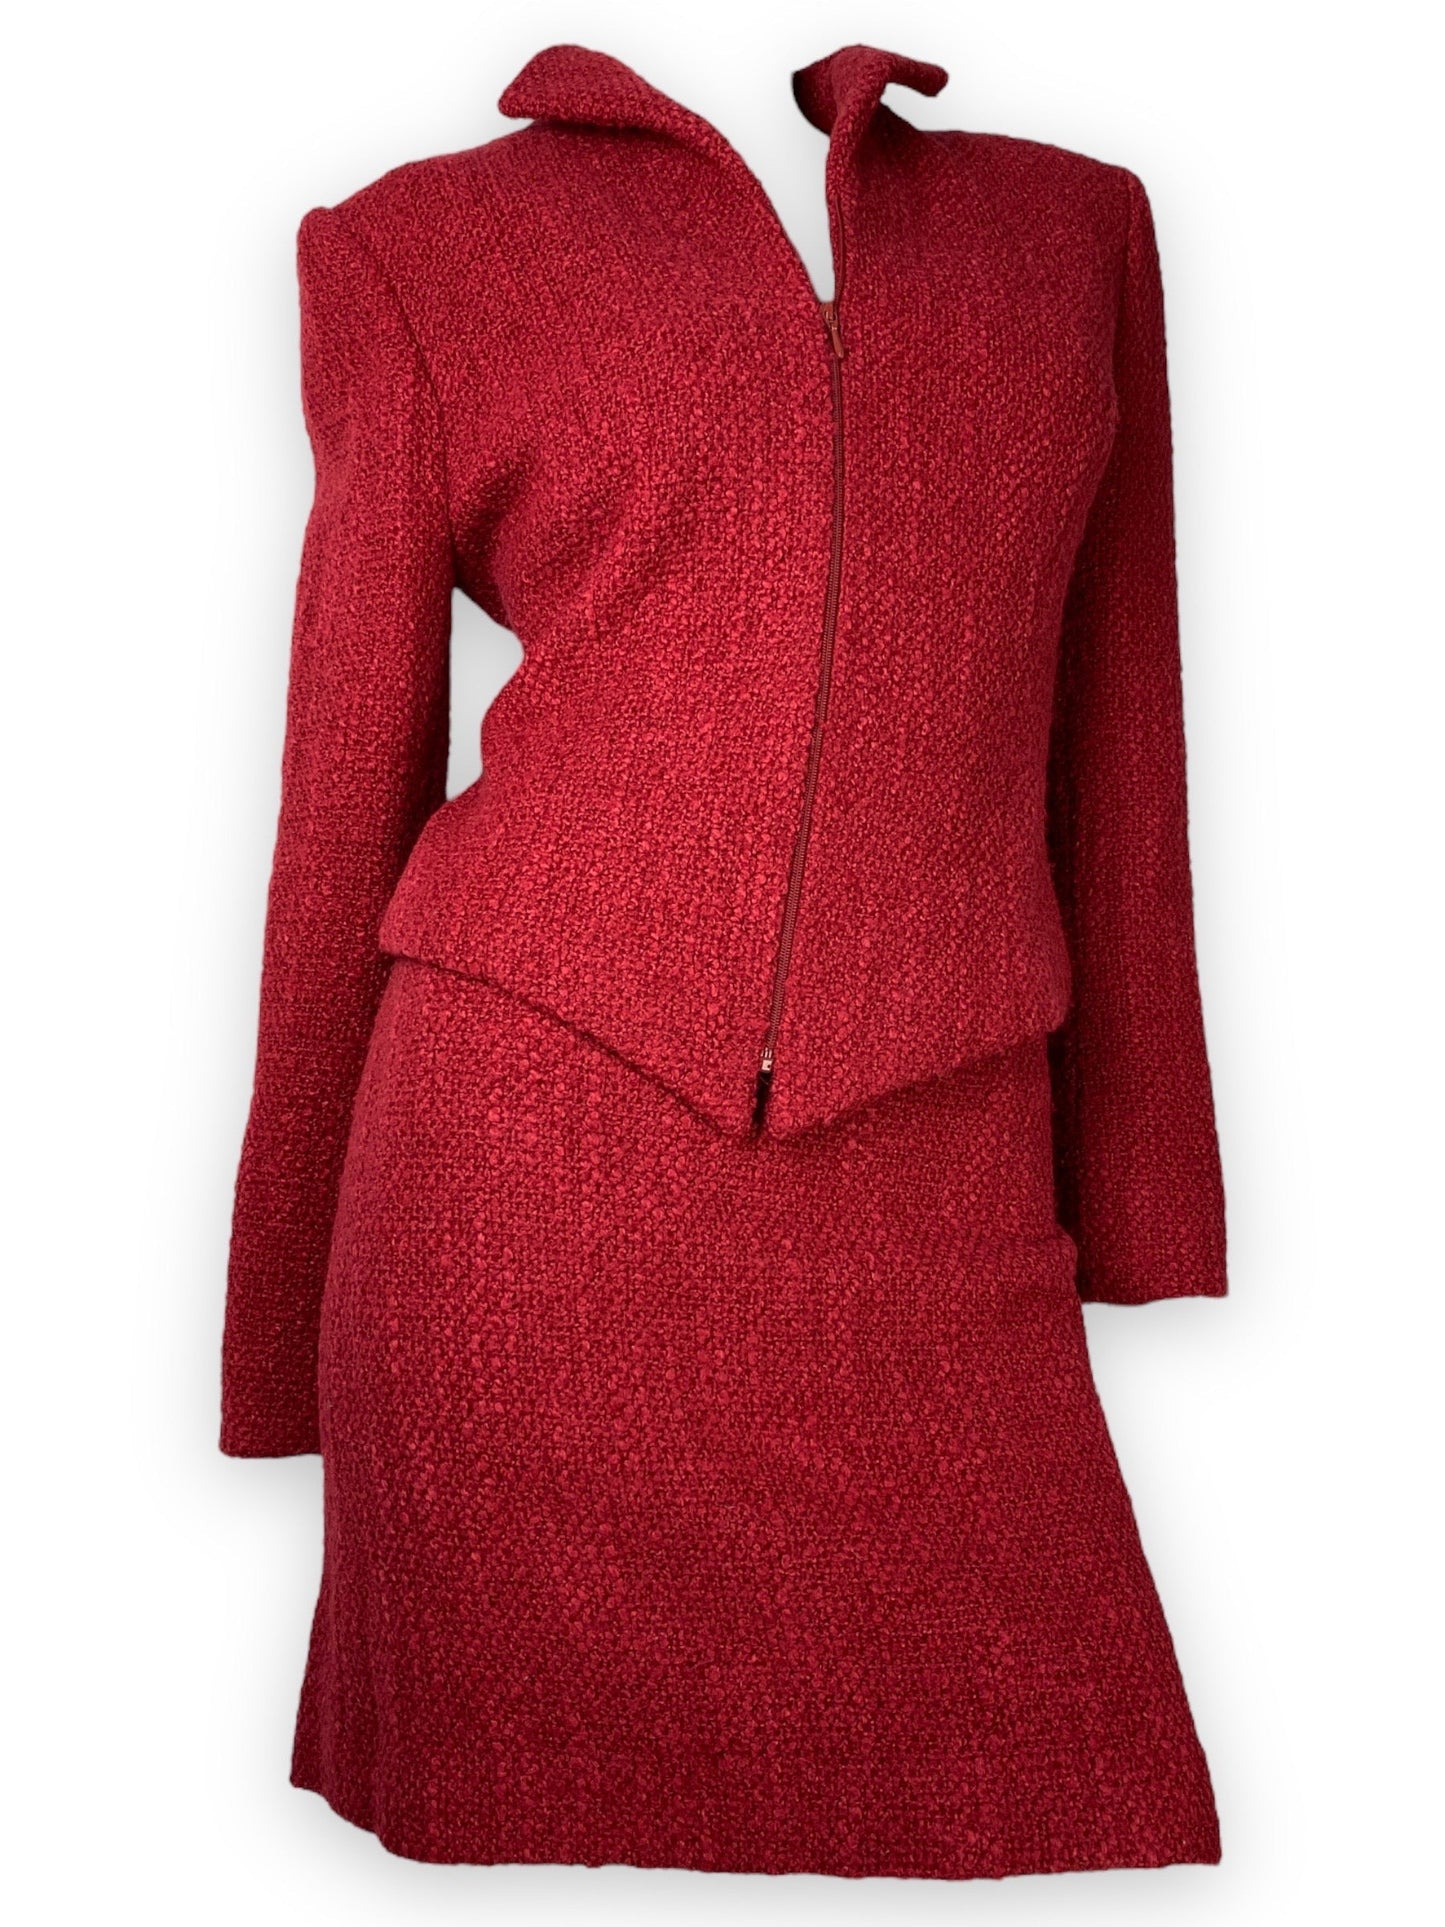 The Classy Woollen Red One